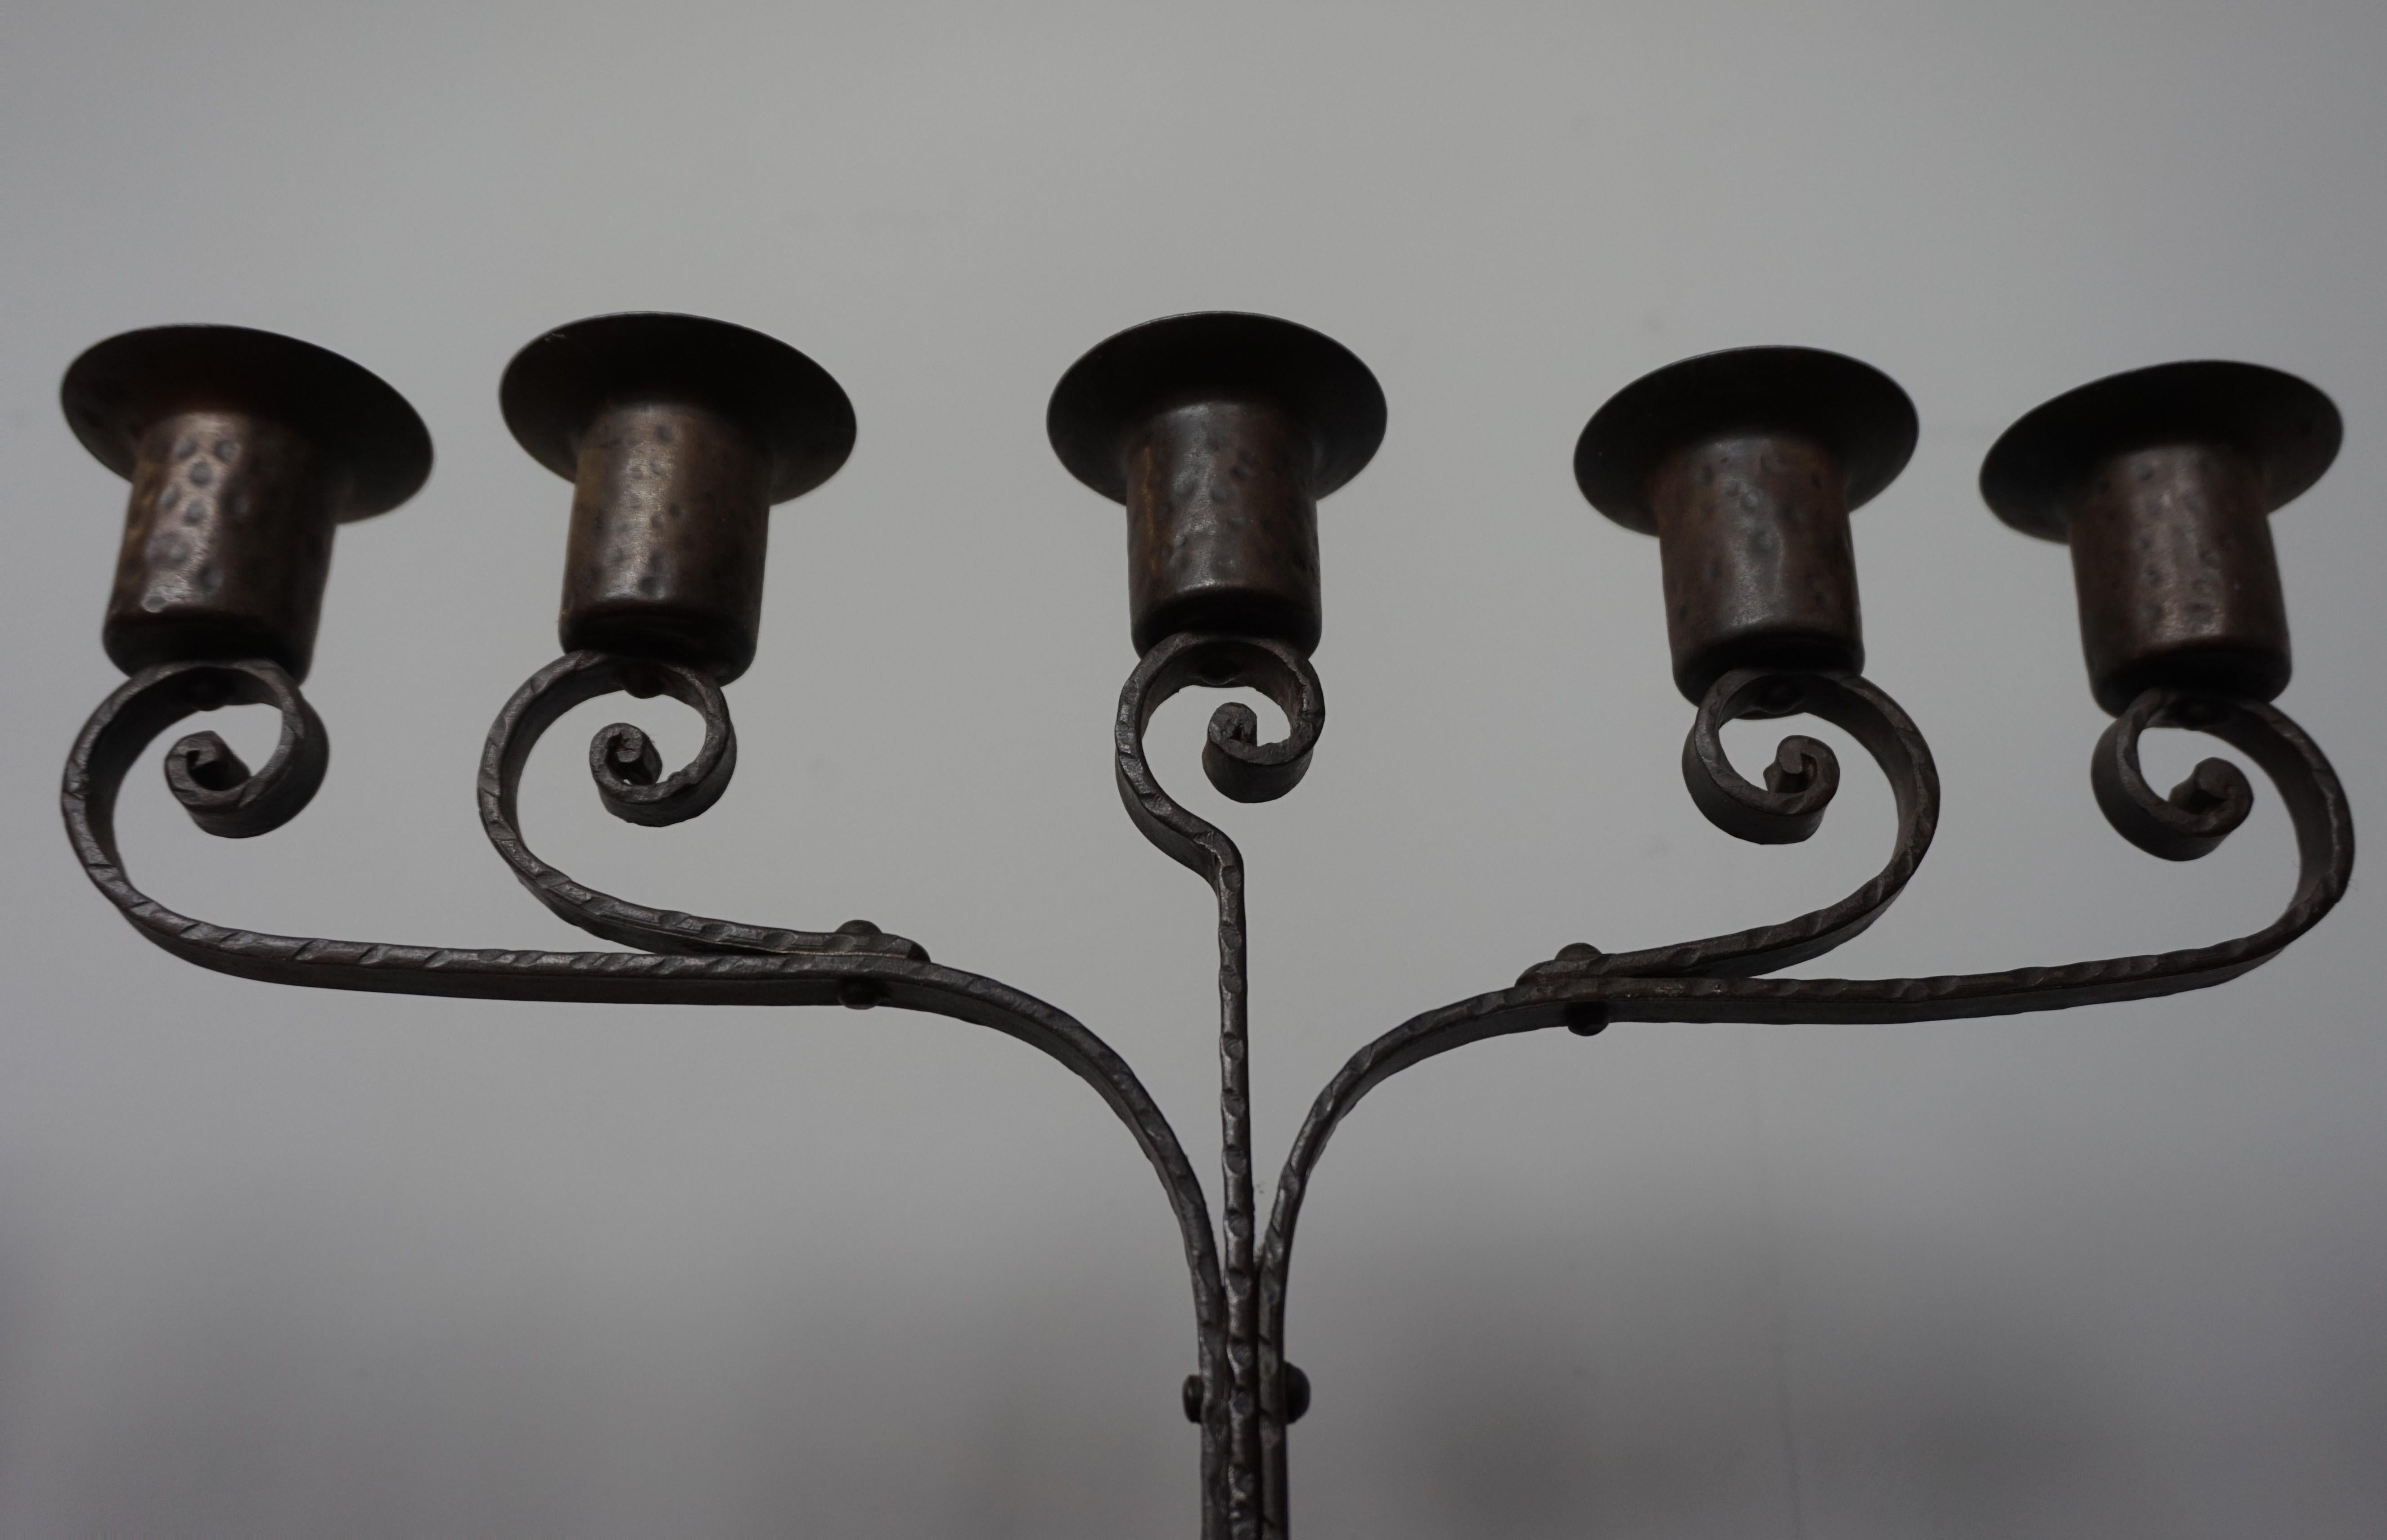 Unique Pair of Hand Forged Wrought Iron Arts & Crafts Table Candelabras, 1910s For Sale 5